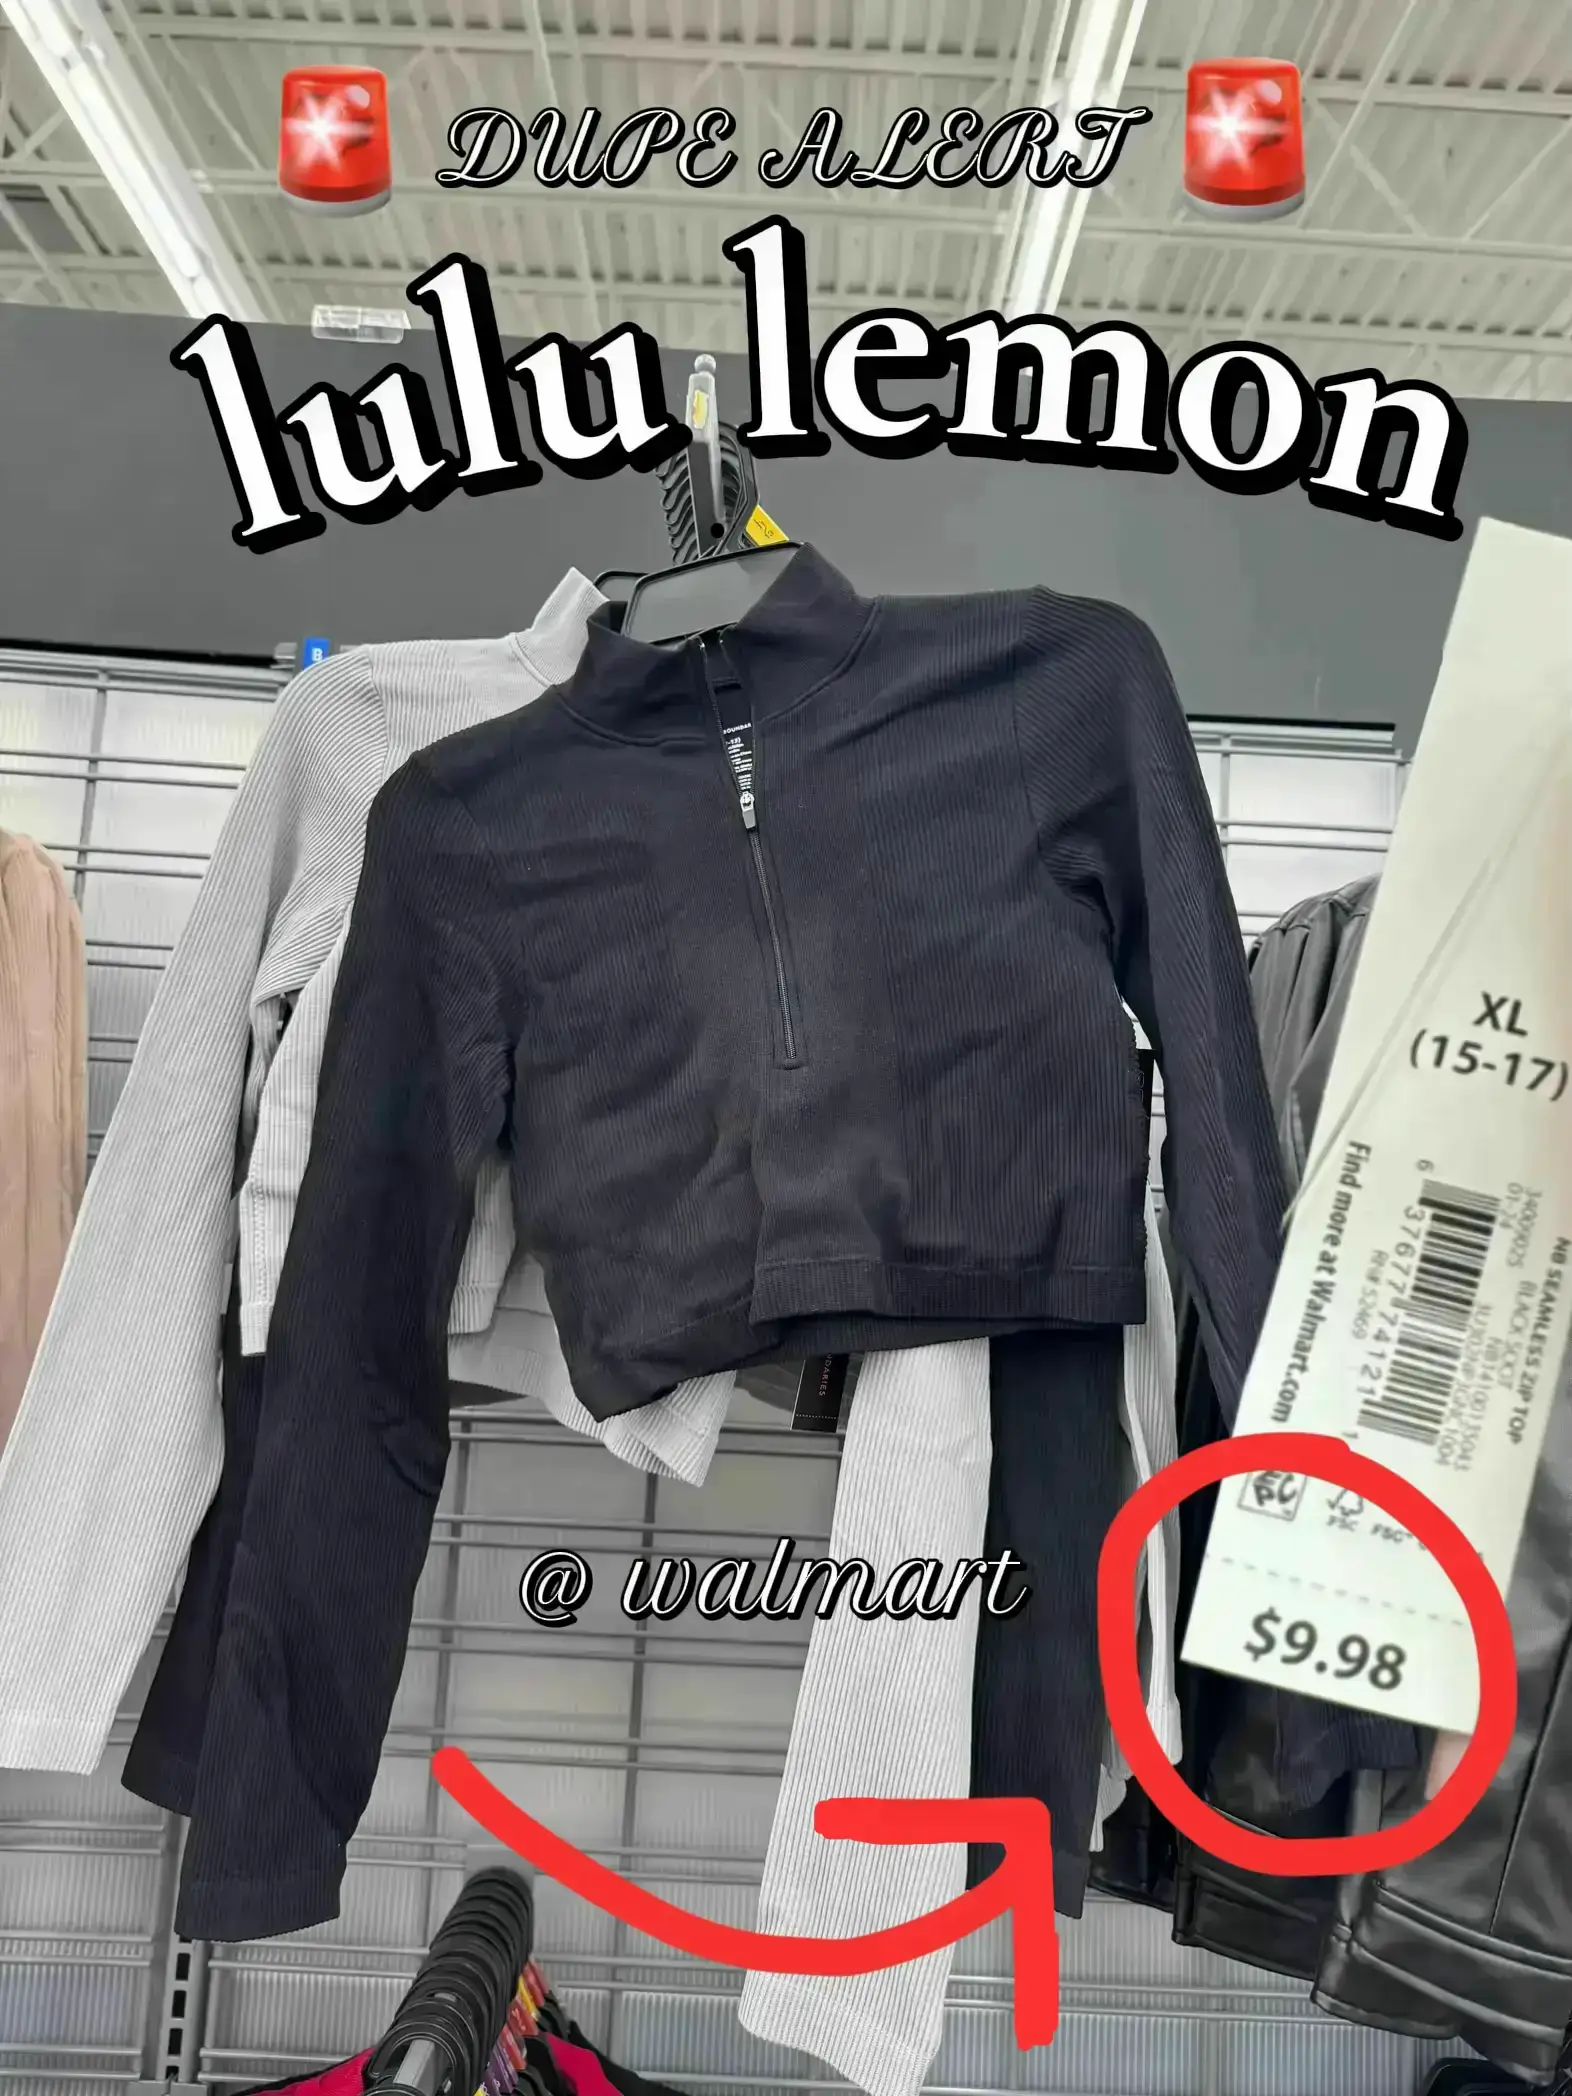 Affordable Lululemon Dupes at Costco with Pockets - Perfect for